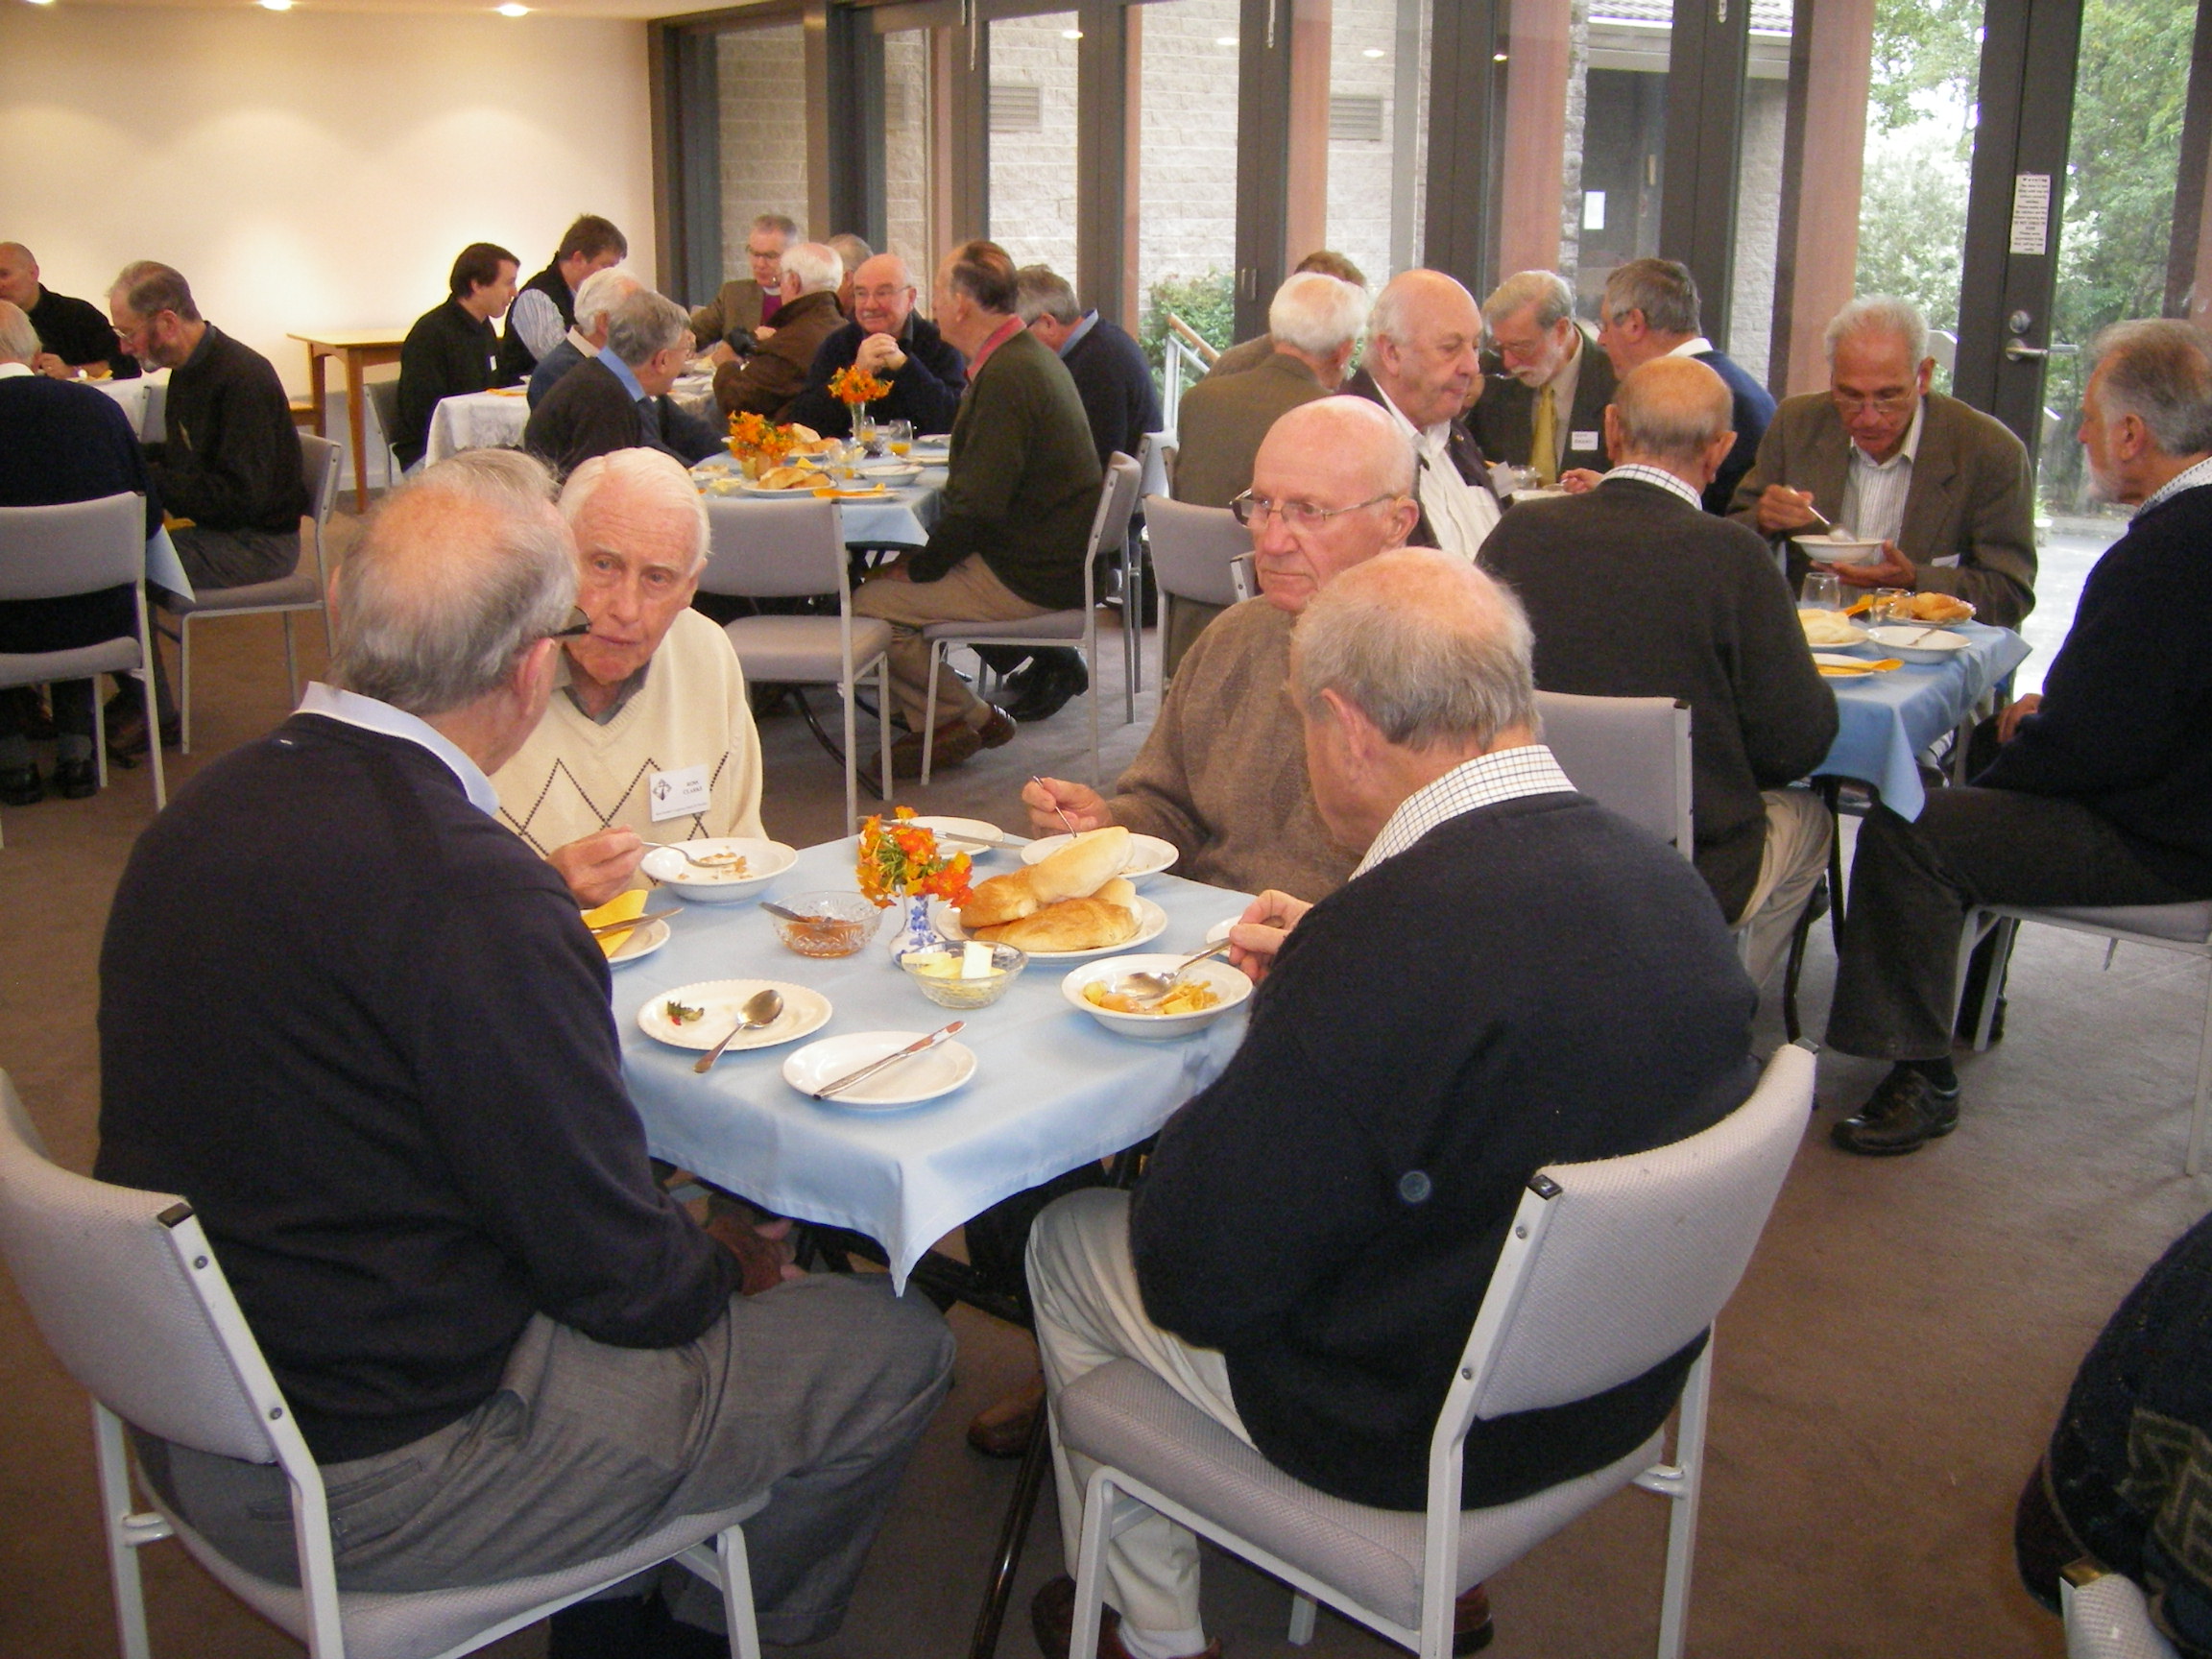 Some of the men of the parish enjoy breakfast together